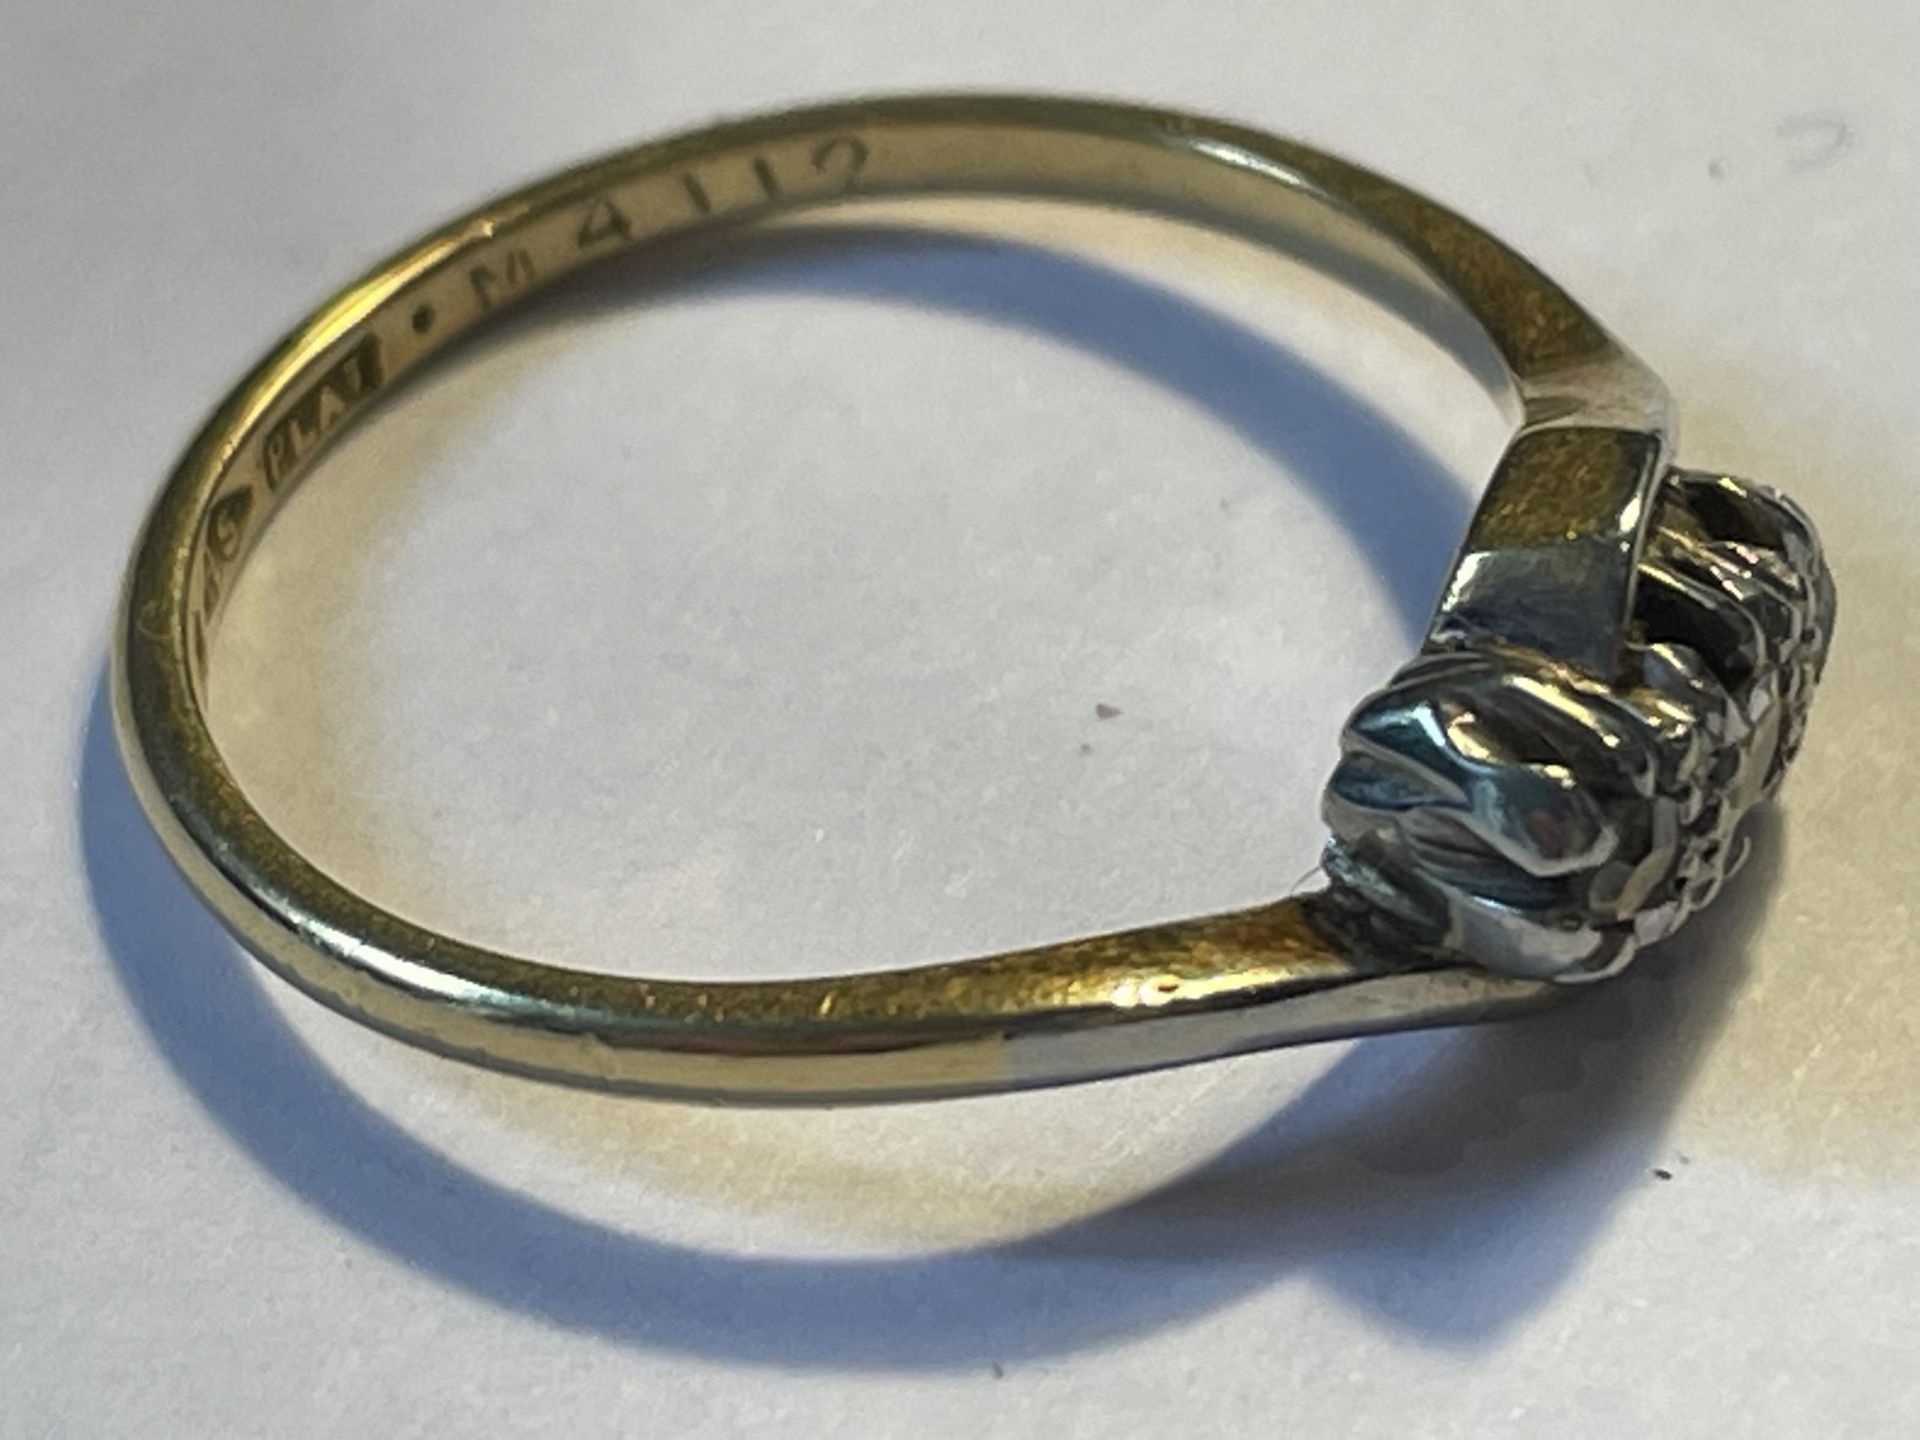 A PLATINUM RING WITH THREE IN LINE DIAMONDS SIZE L/M GROSS WEIGHT 2.01 GRAMS - Image 3 of 4